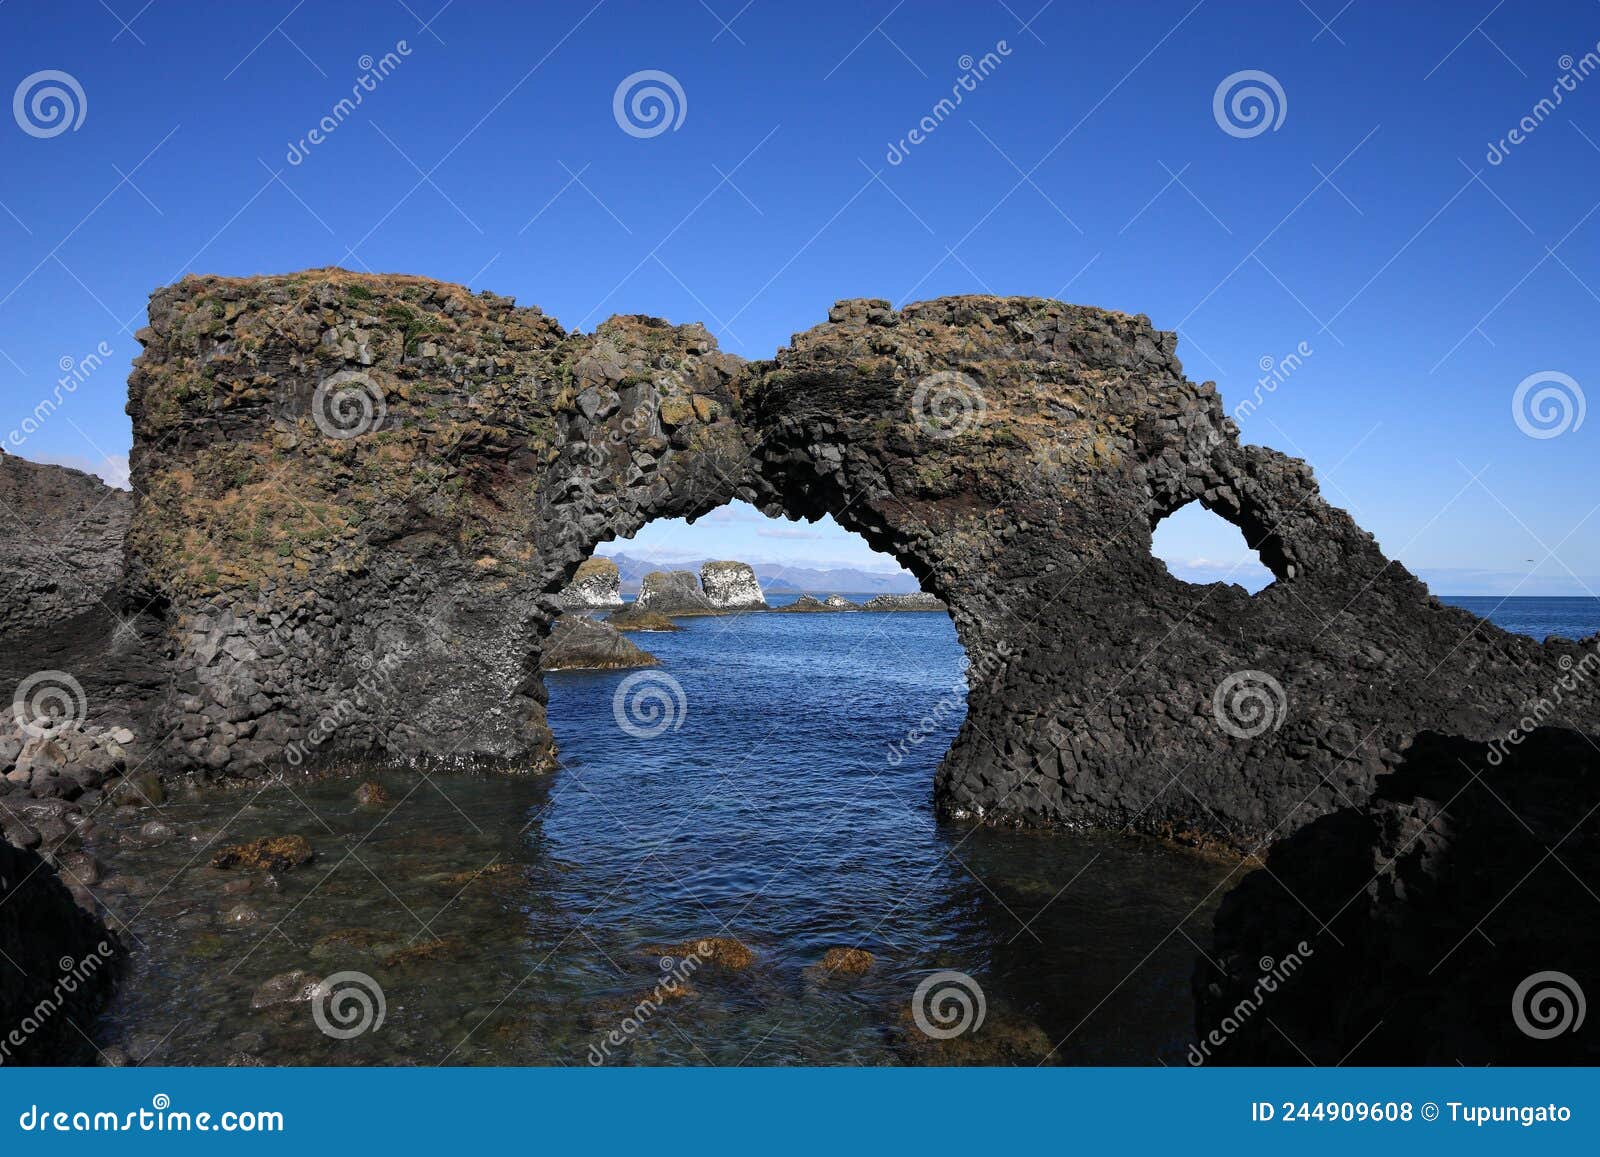 natural rock arch in iceland